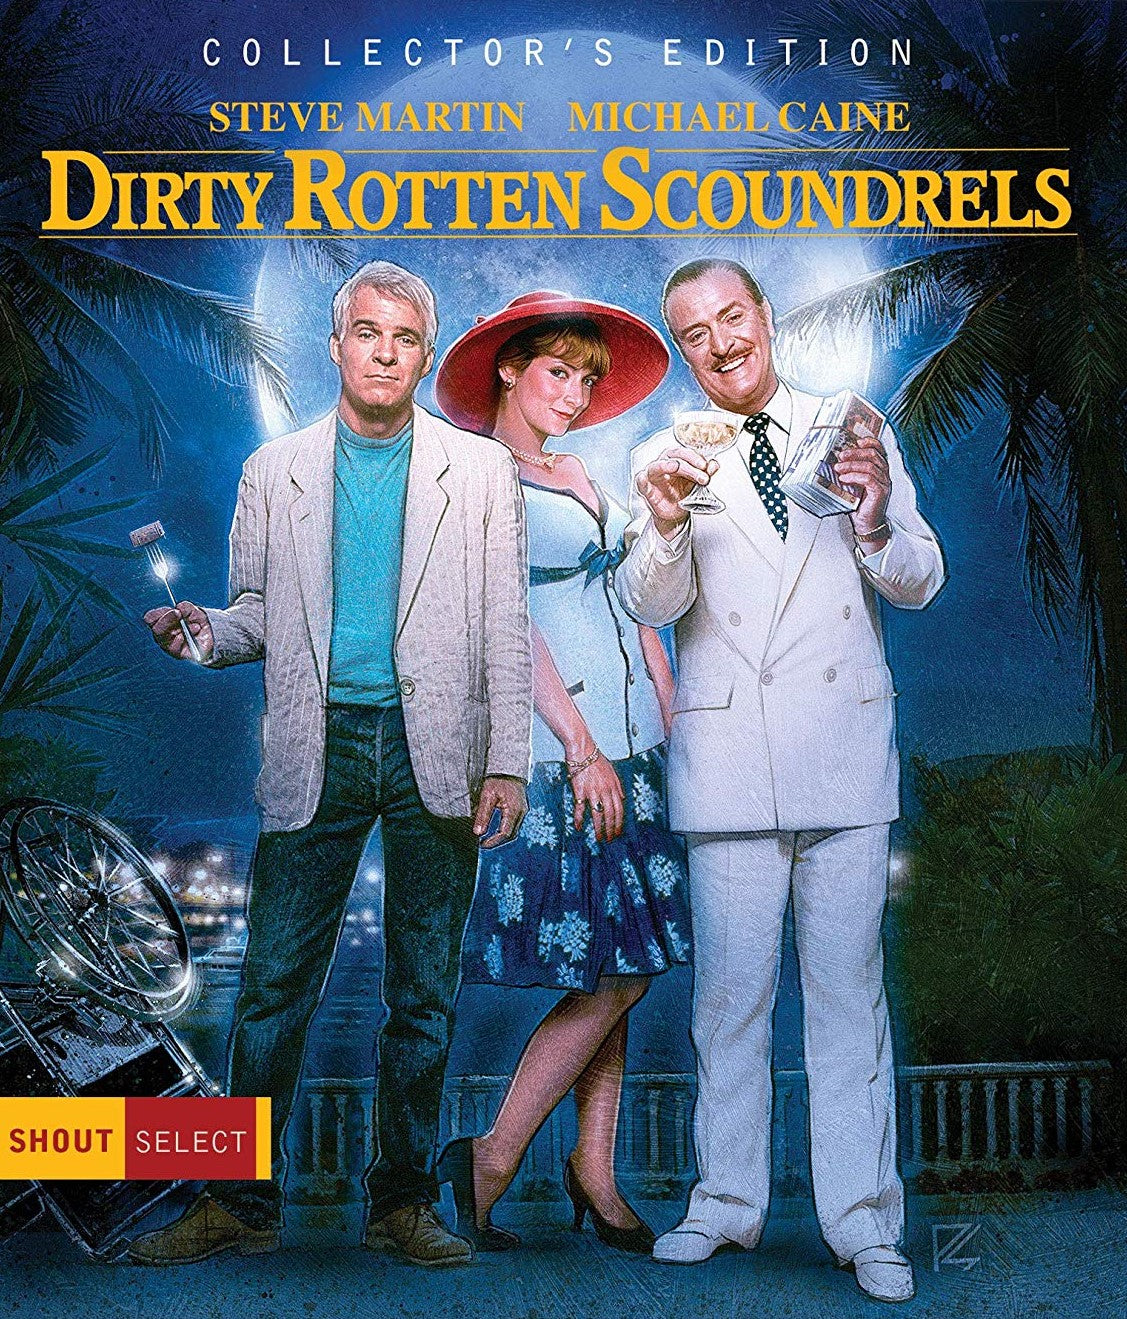 Dirty Rotten Scoundrels (Collectors Edition) Blu-Ray Blu-Ray